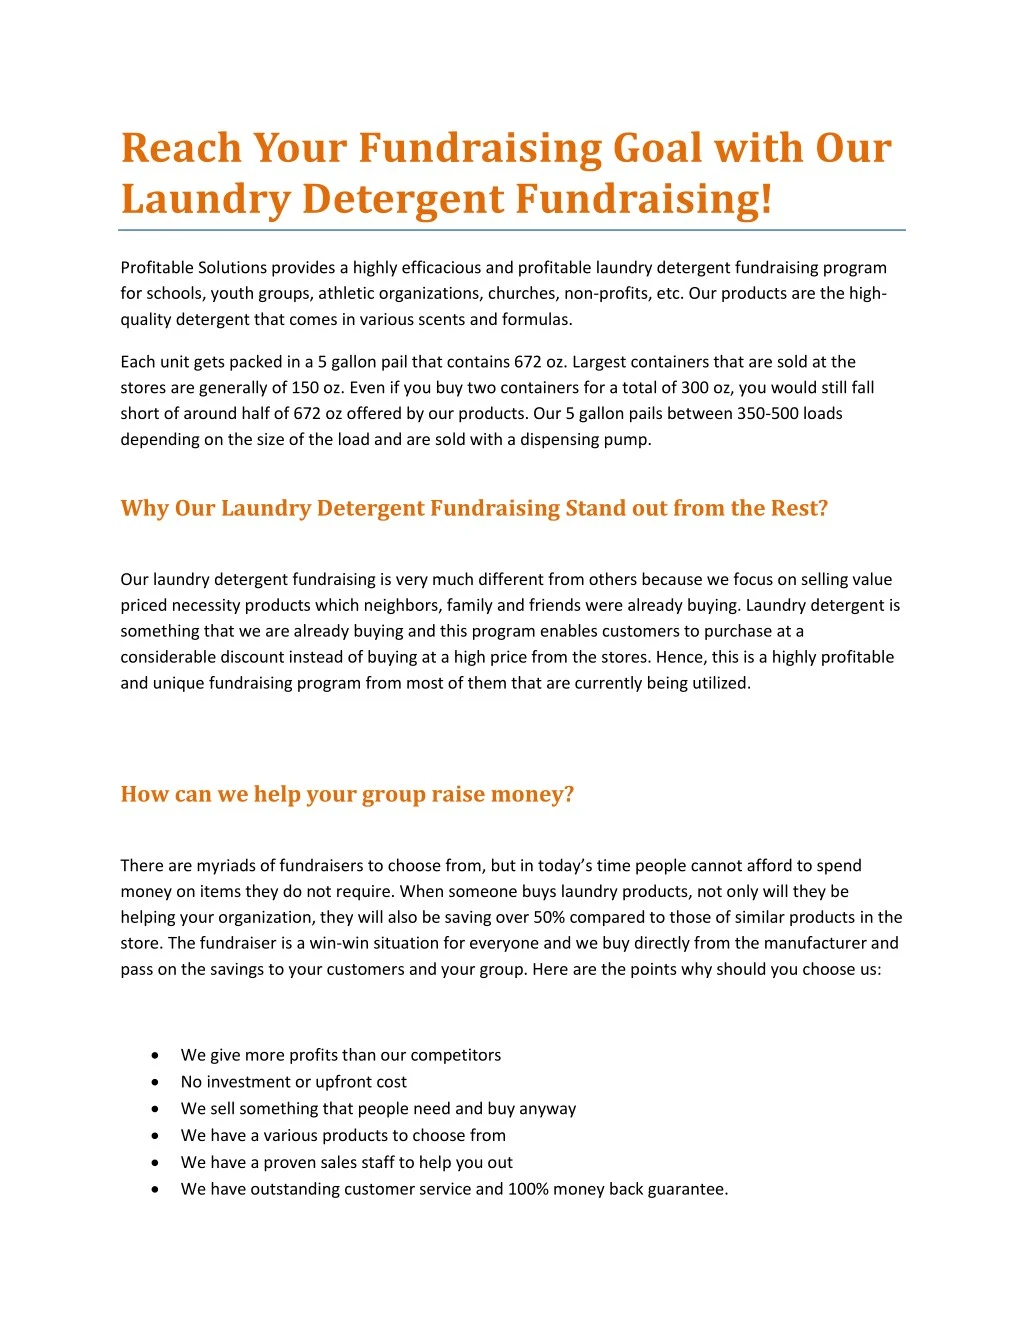 reach your fundraising goal with our laundry